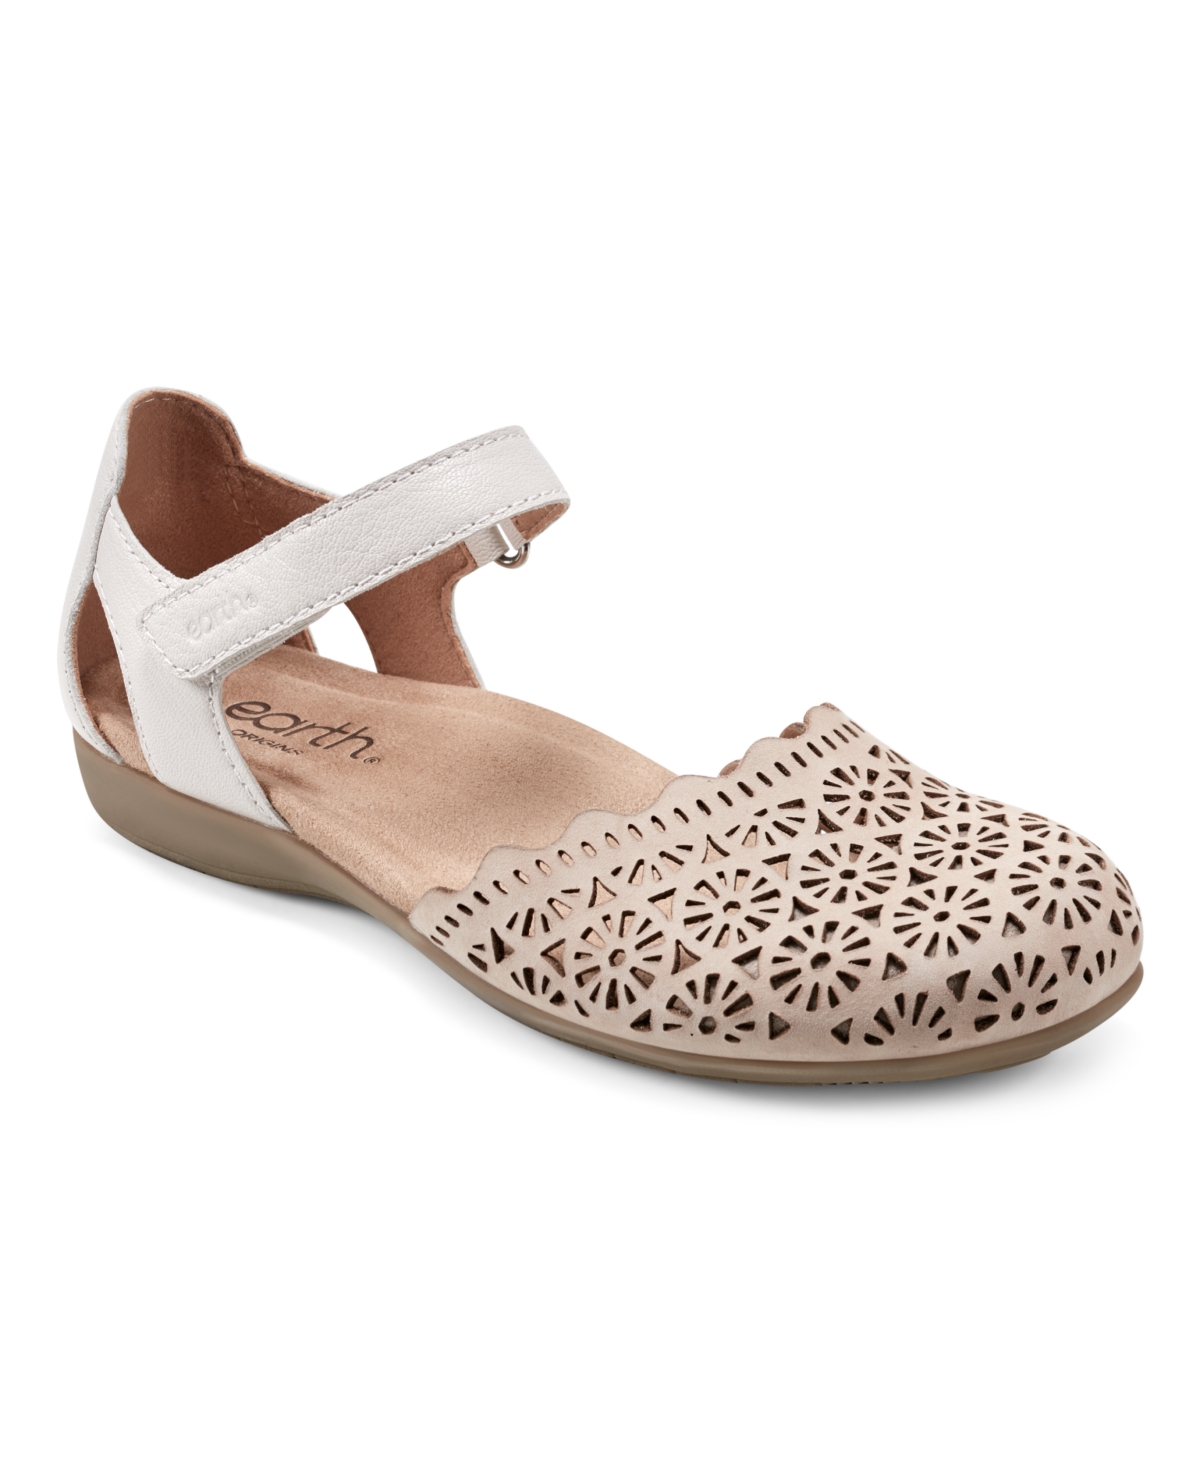 Shop Earth Women's Bronnie Round Toe Casual Slip-on Flat Shoes In Light Natural,cream Multi